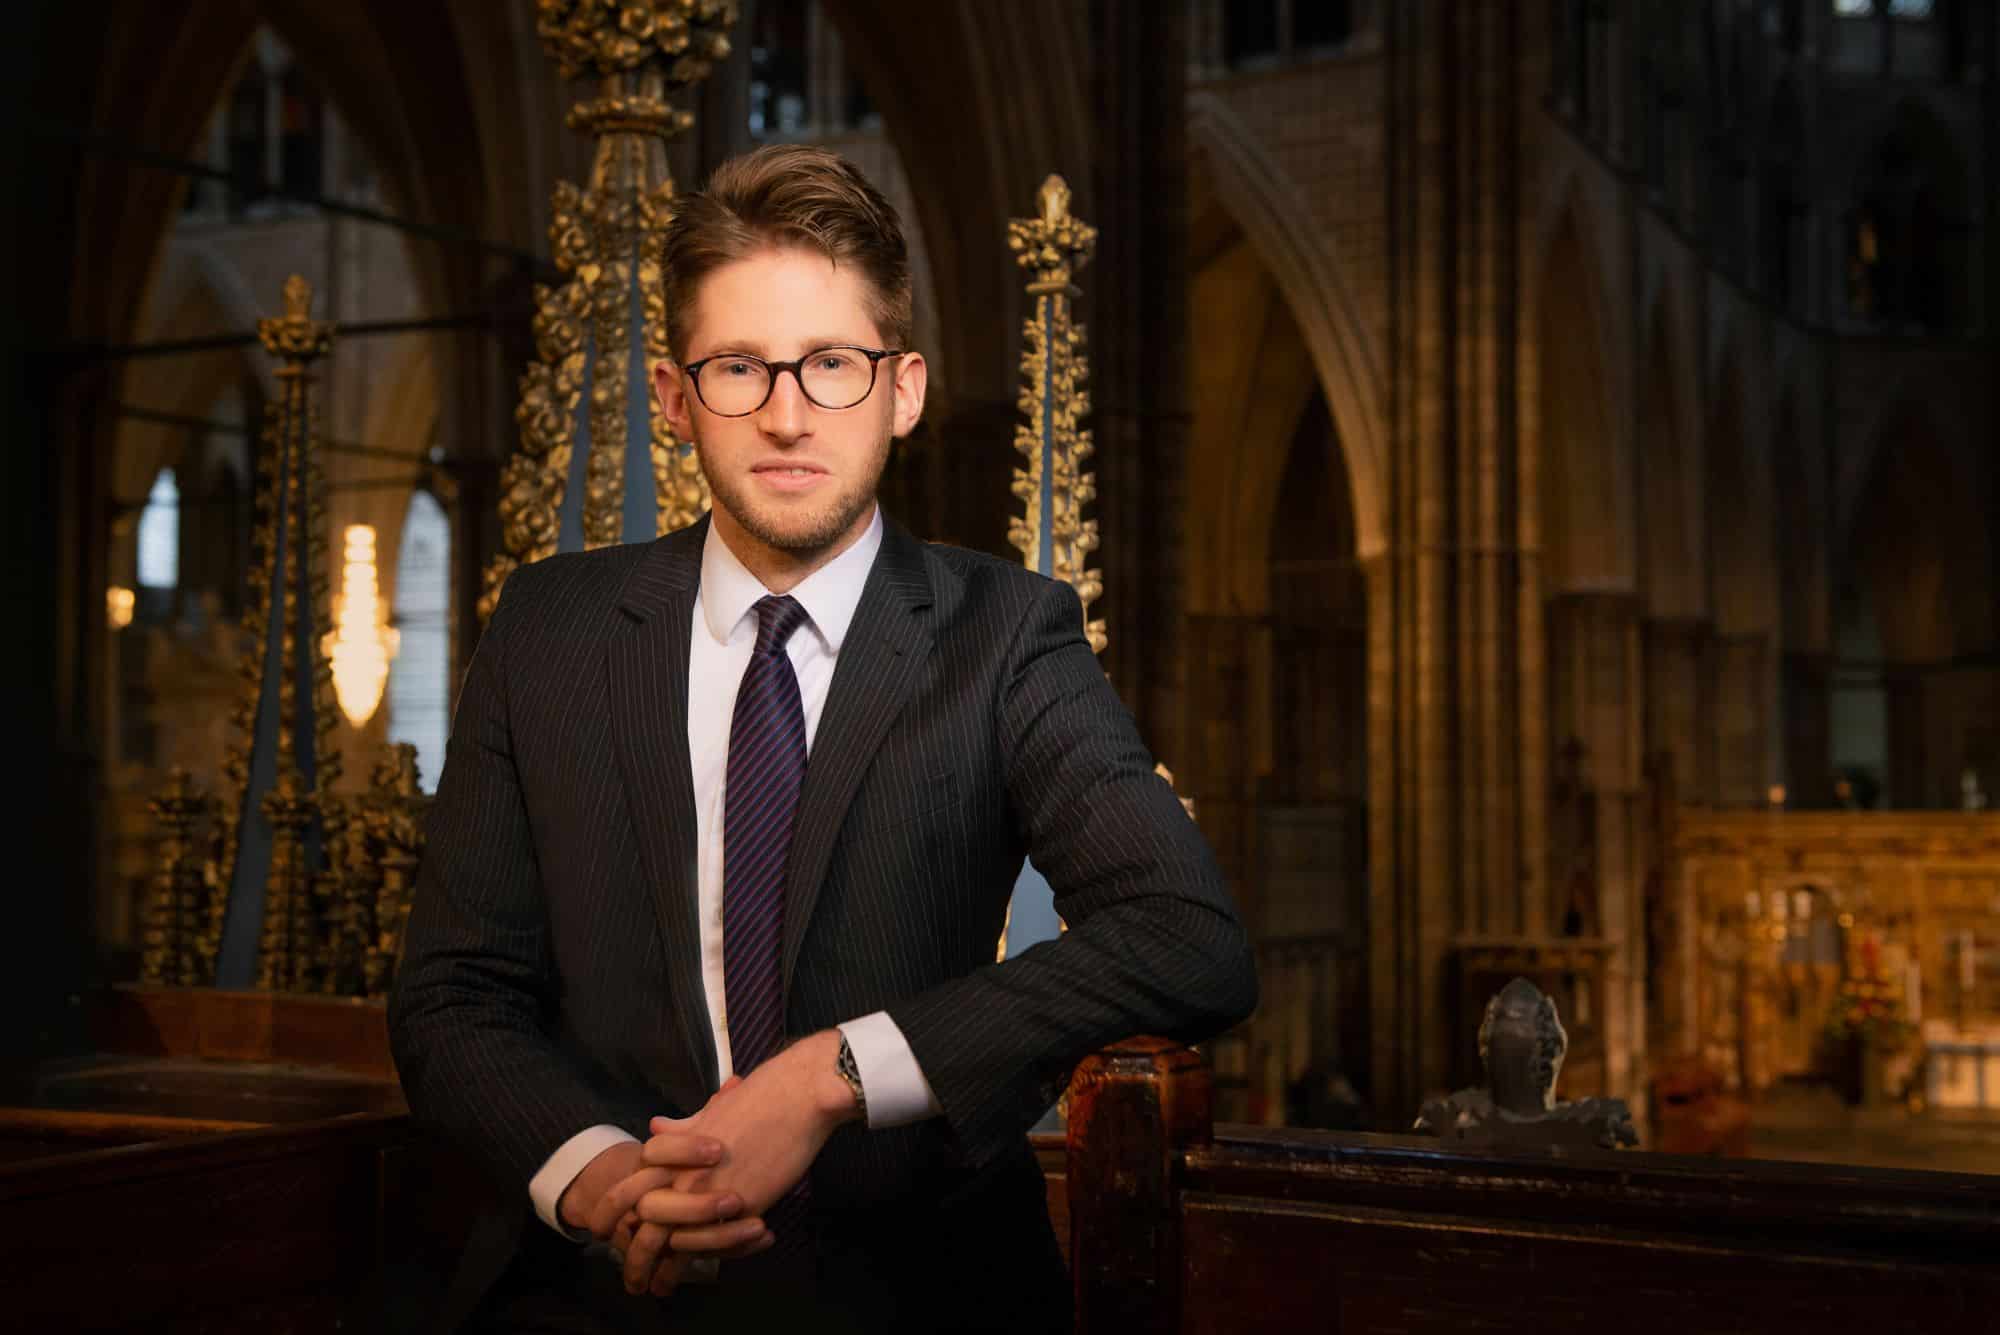 Holy smoke: Oxford grabs Westminster Abbey organist